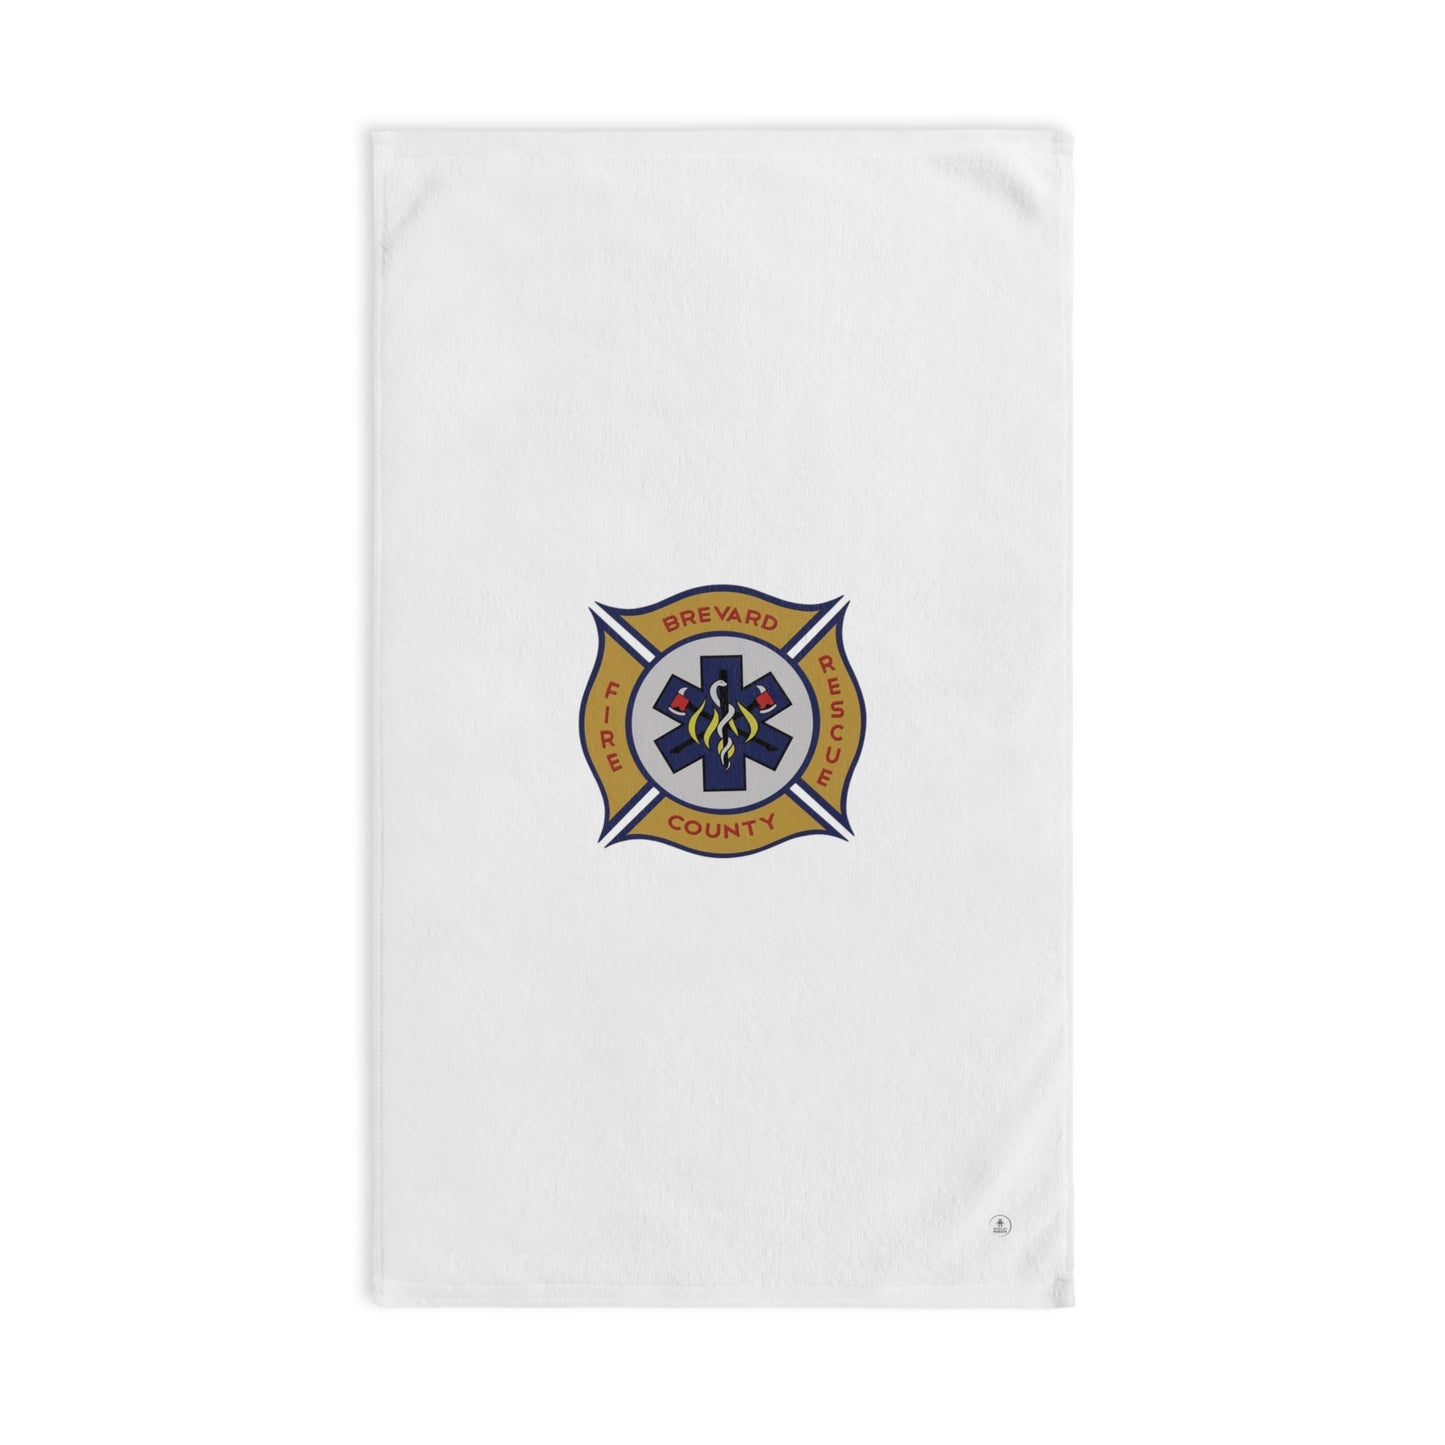 Brevard County Fire Rescue Department Logo Hand Towel